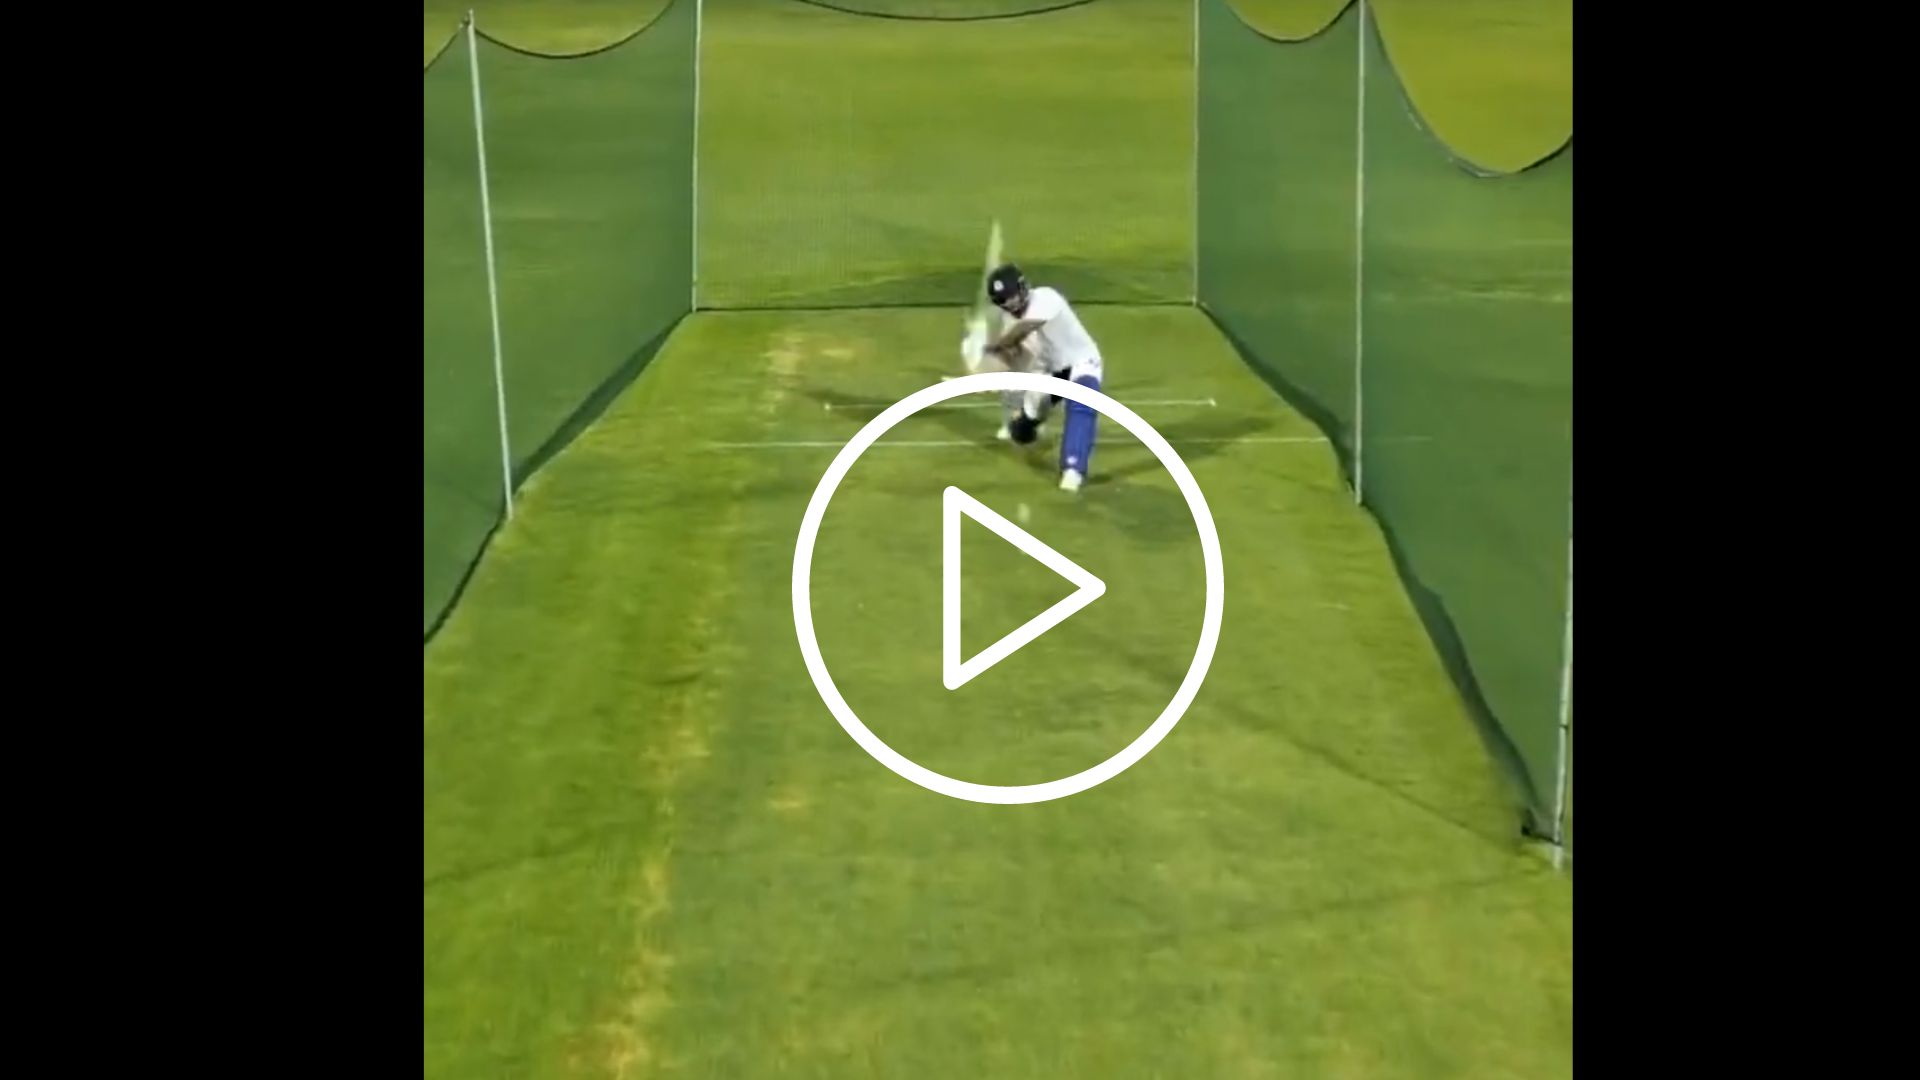 [Watch] Sanju Samson Shows Swag With 'Big Sixes' In Sharjah After World Cup Omission